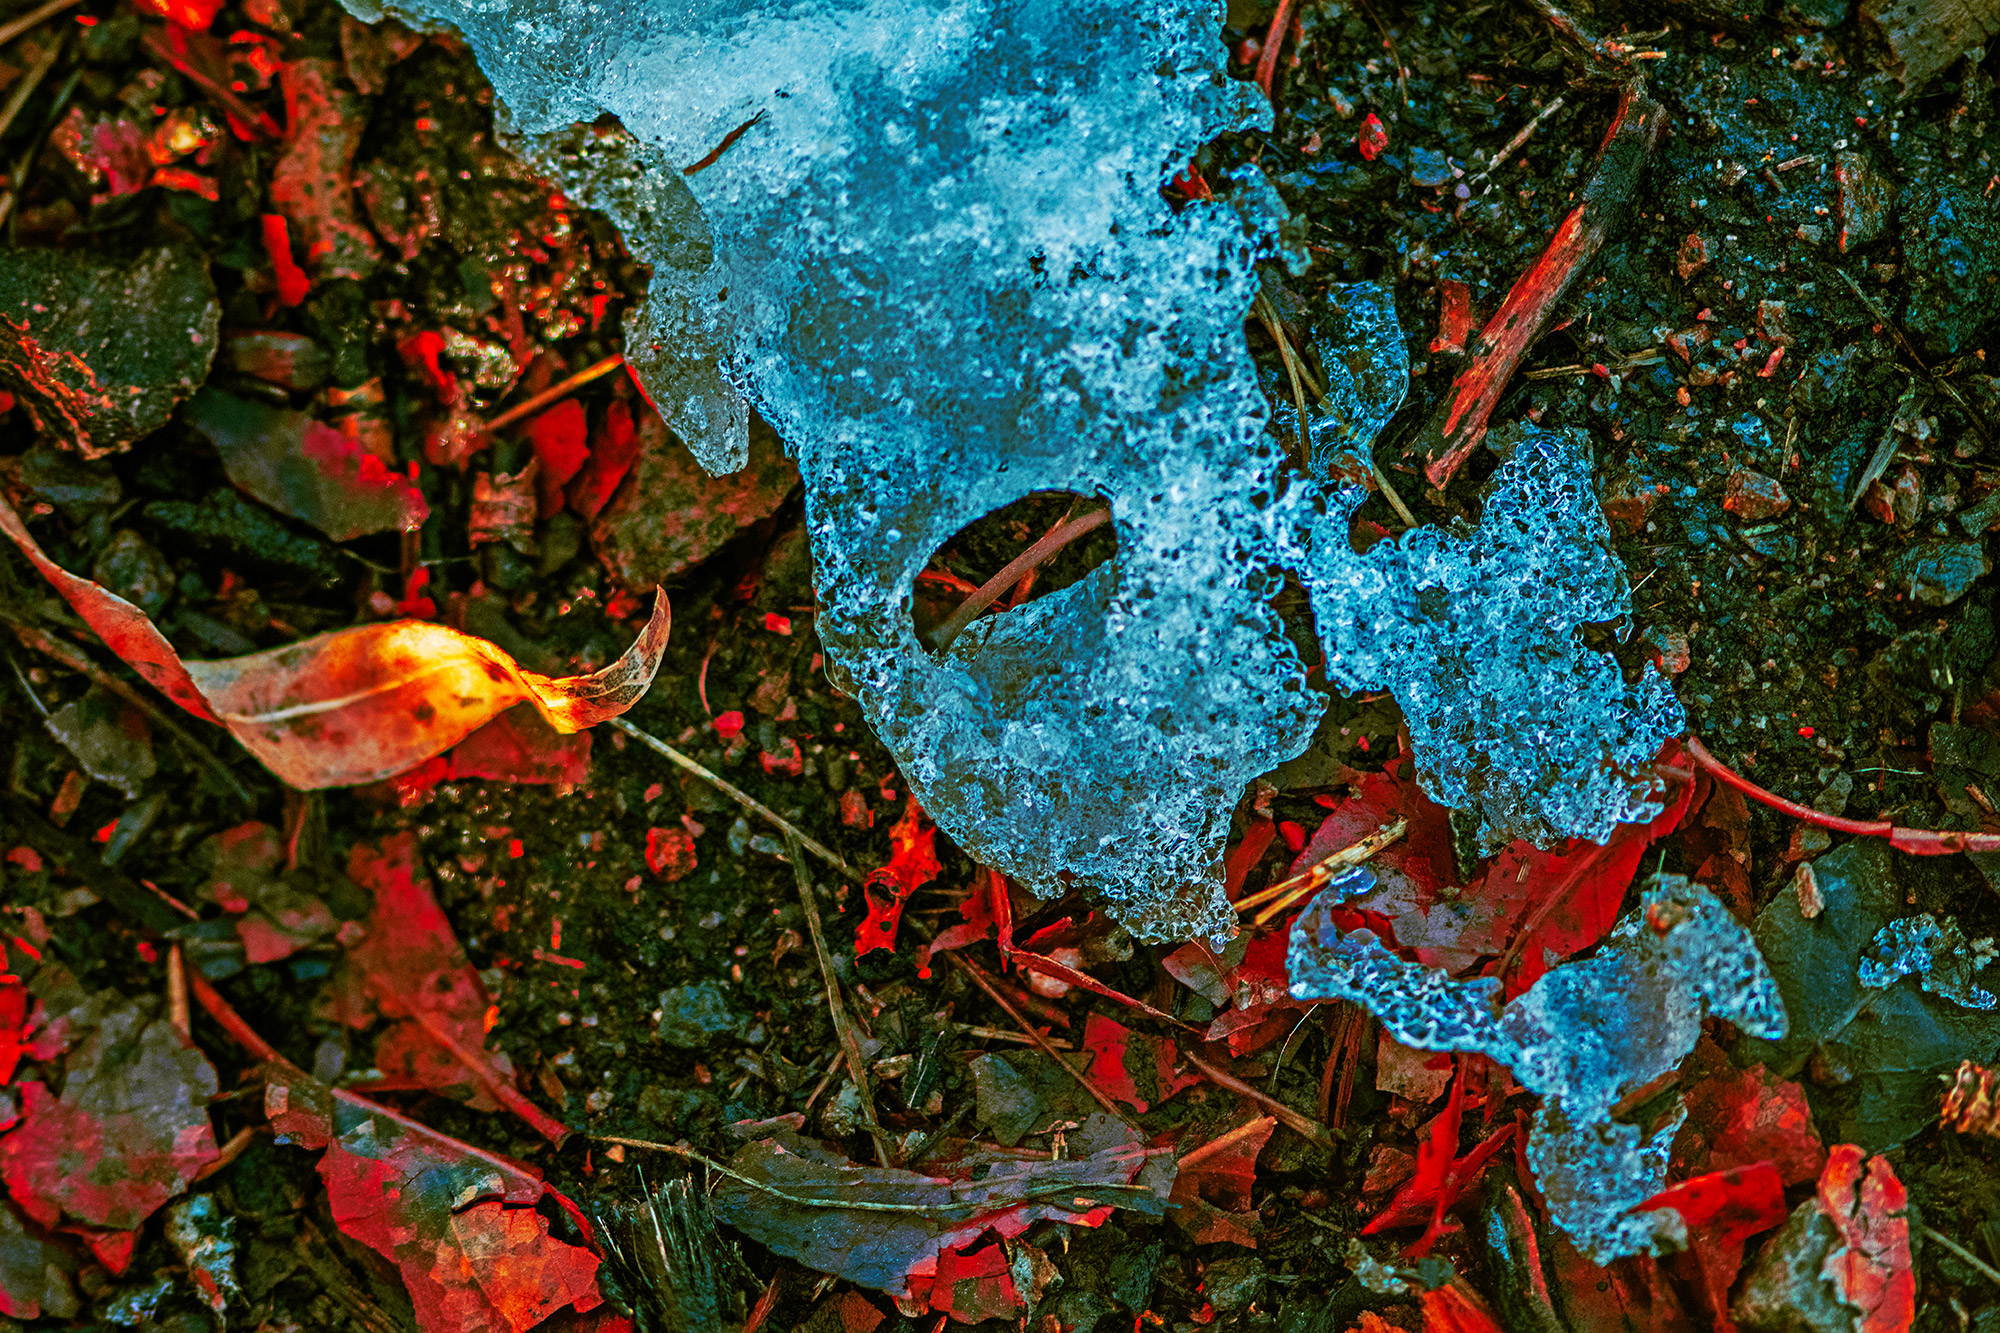 Half Melted Ice Face Atop Dead Leaves (Color Photo)